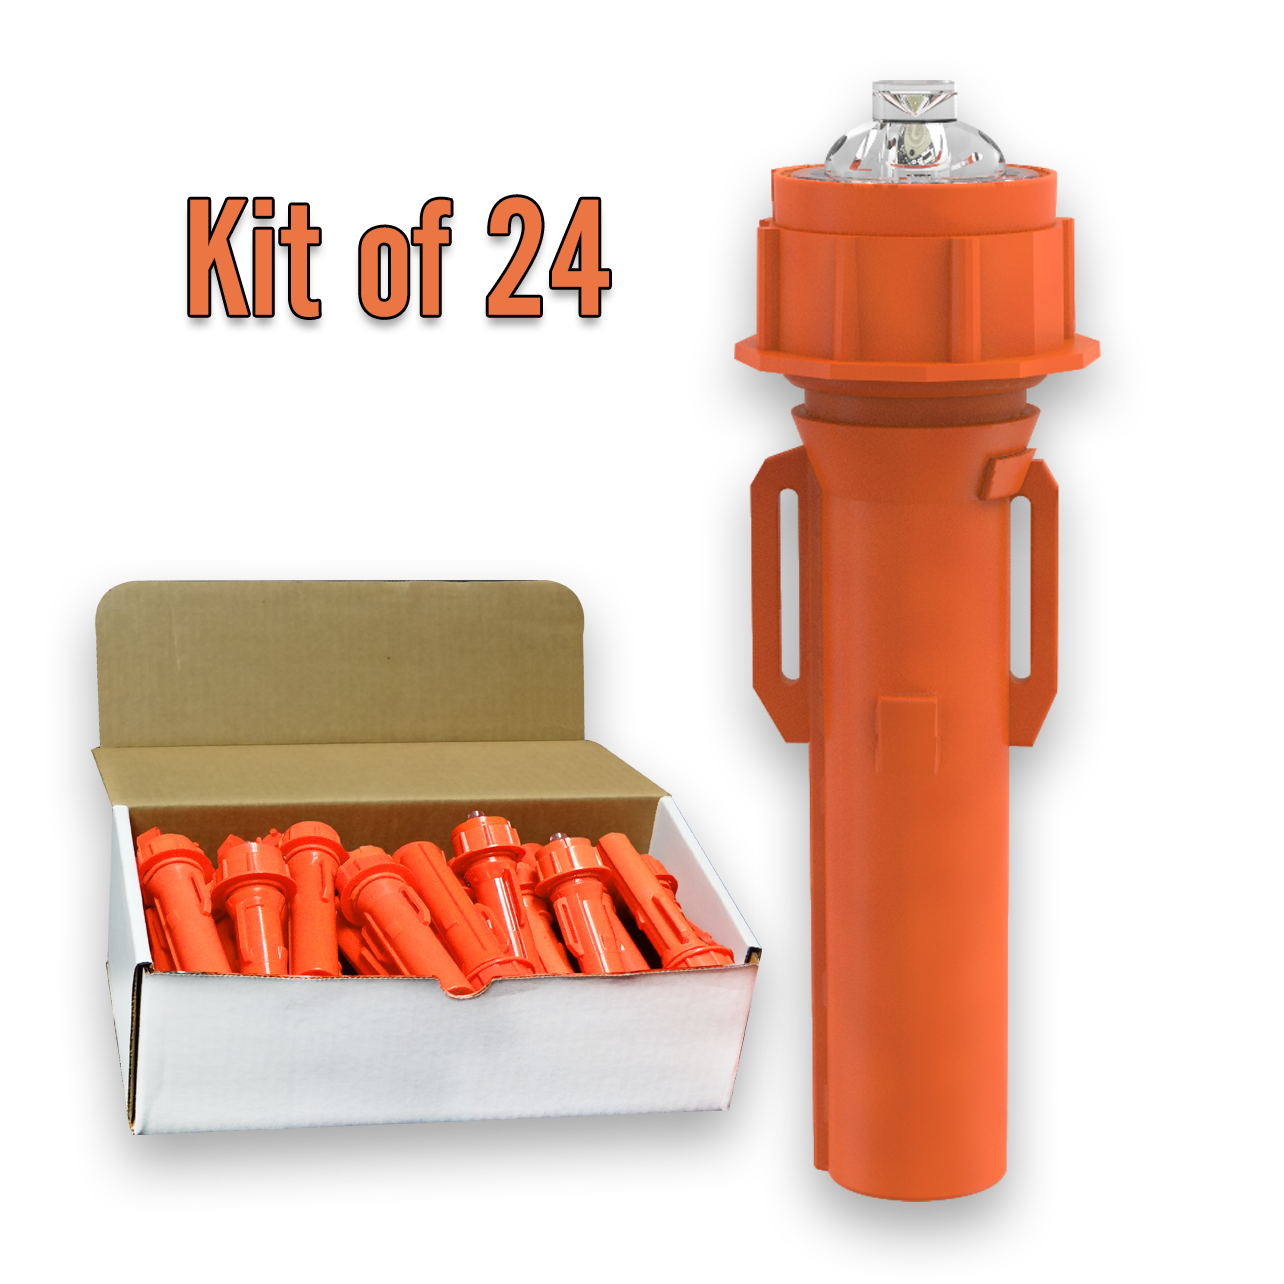 ThriftyFlare™ Cone S Kit #6163 (For Standard Traffic Cones)